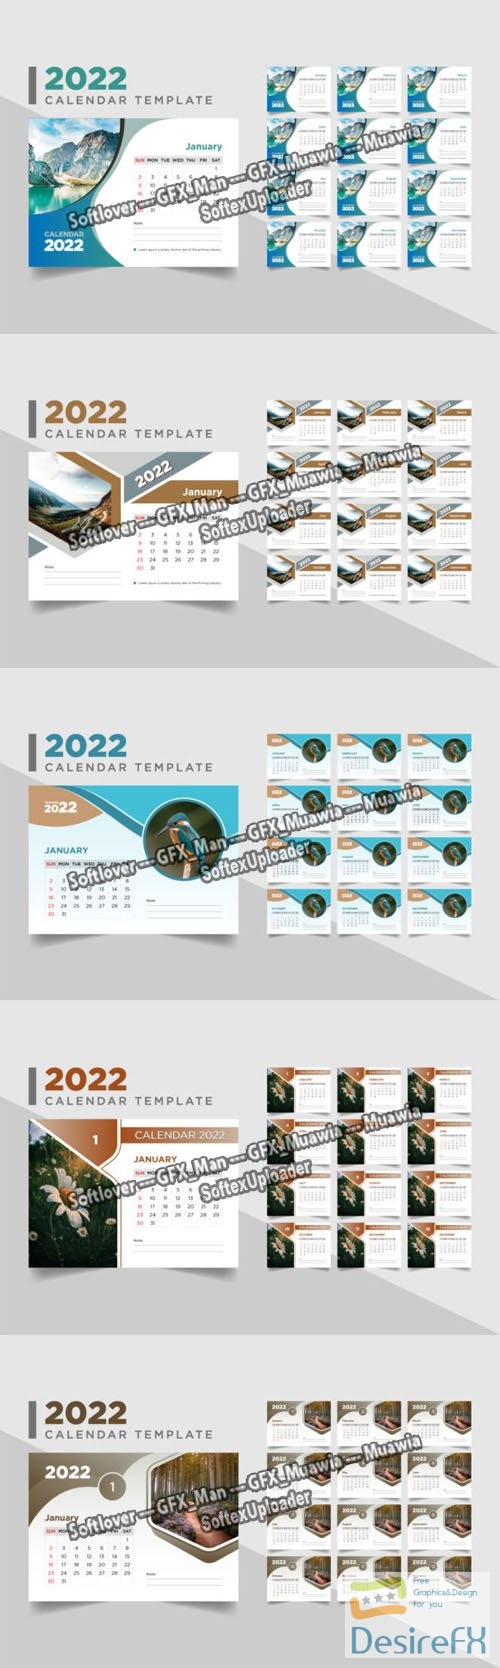 5 Desk Calendars for 2022 Vector Templates Collection 12-Months